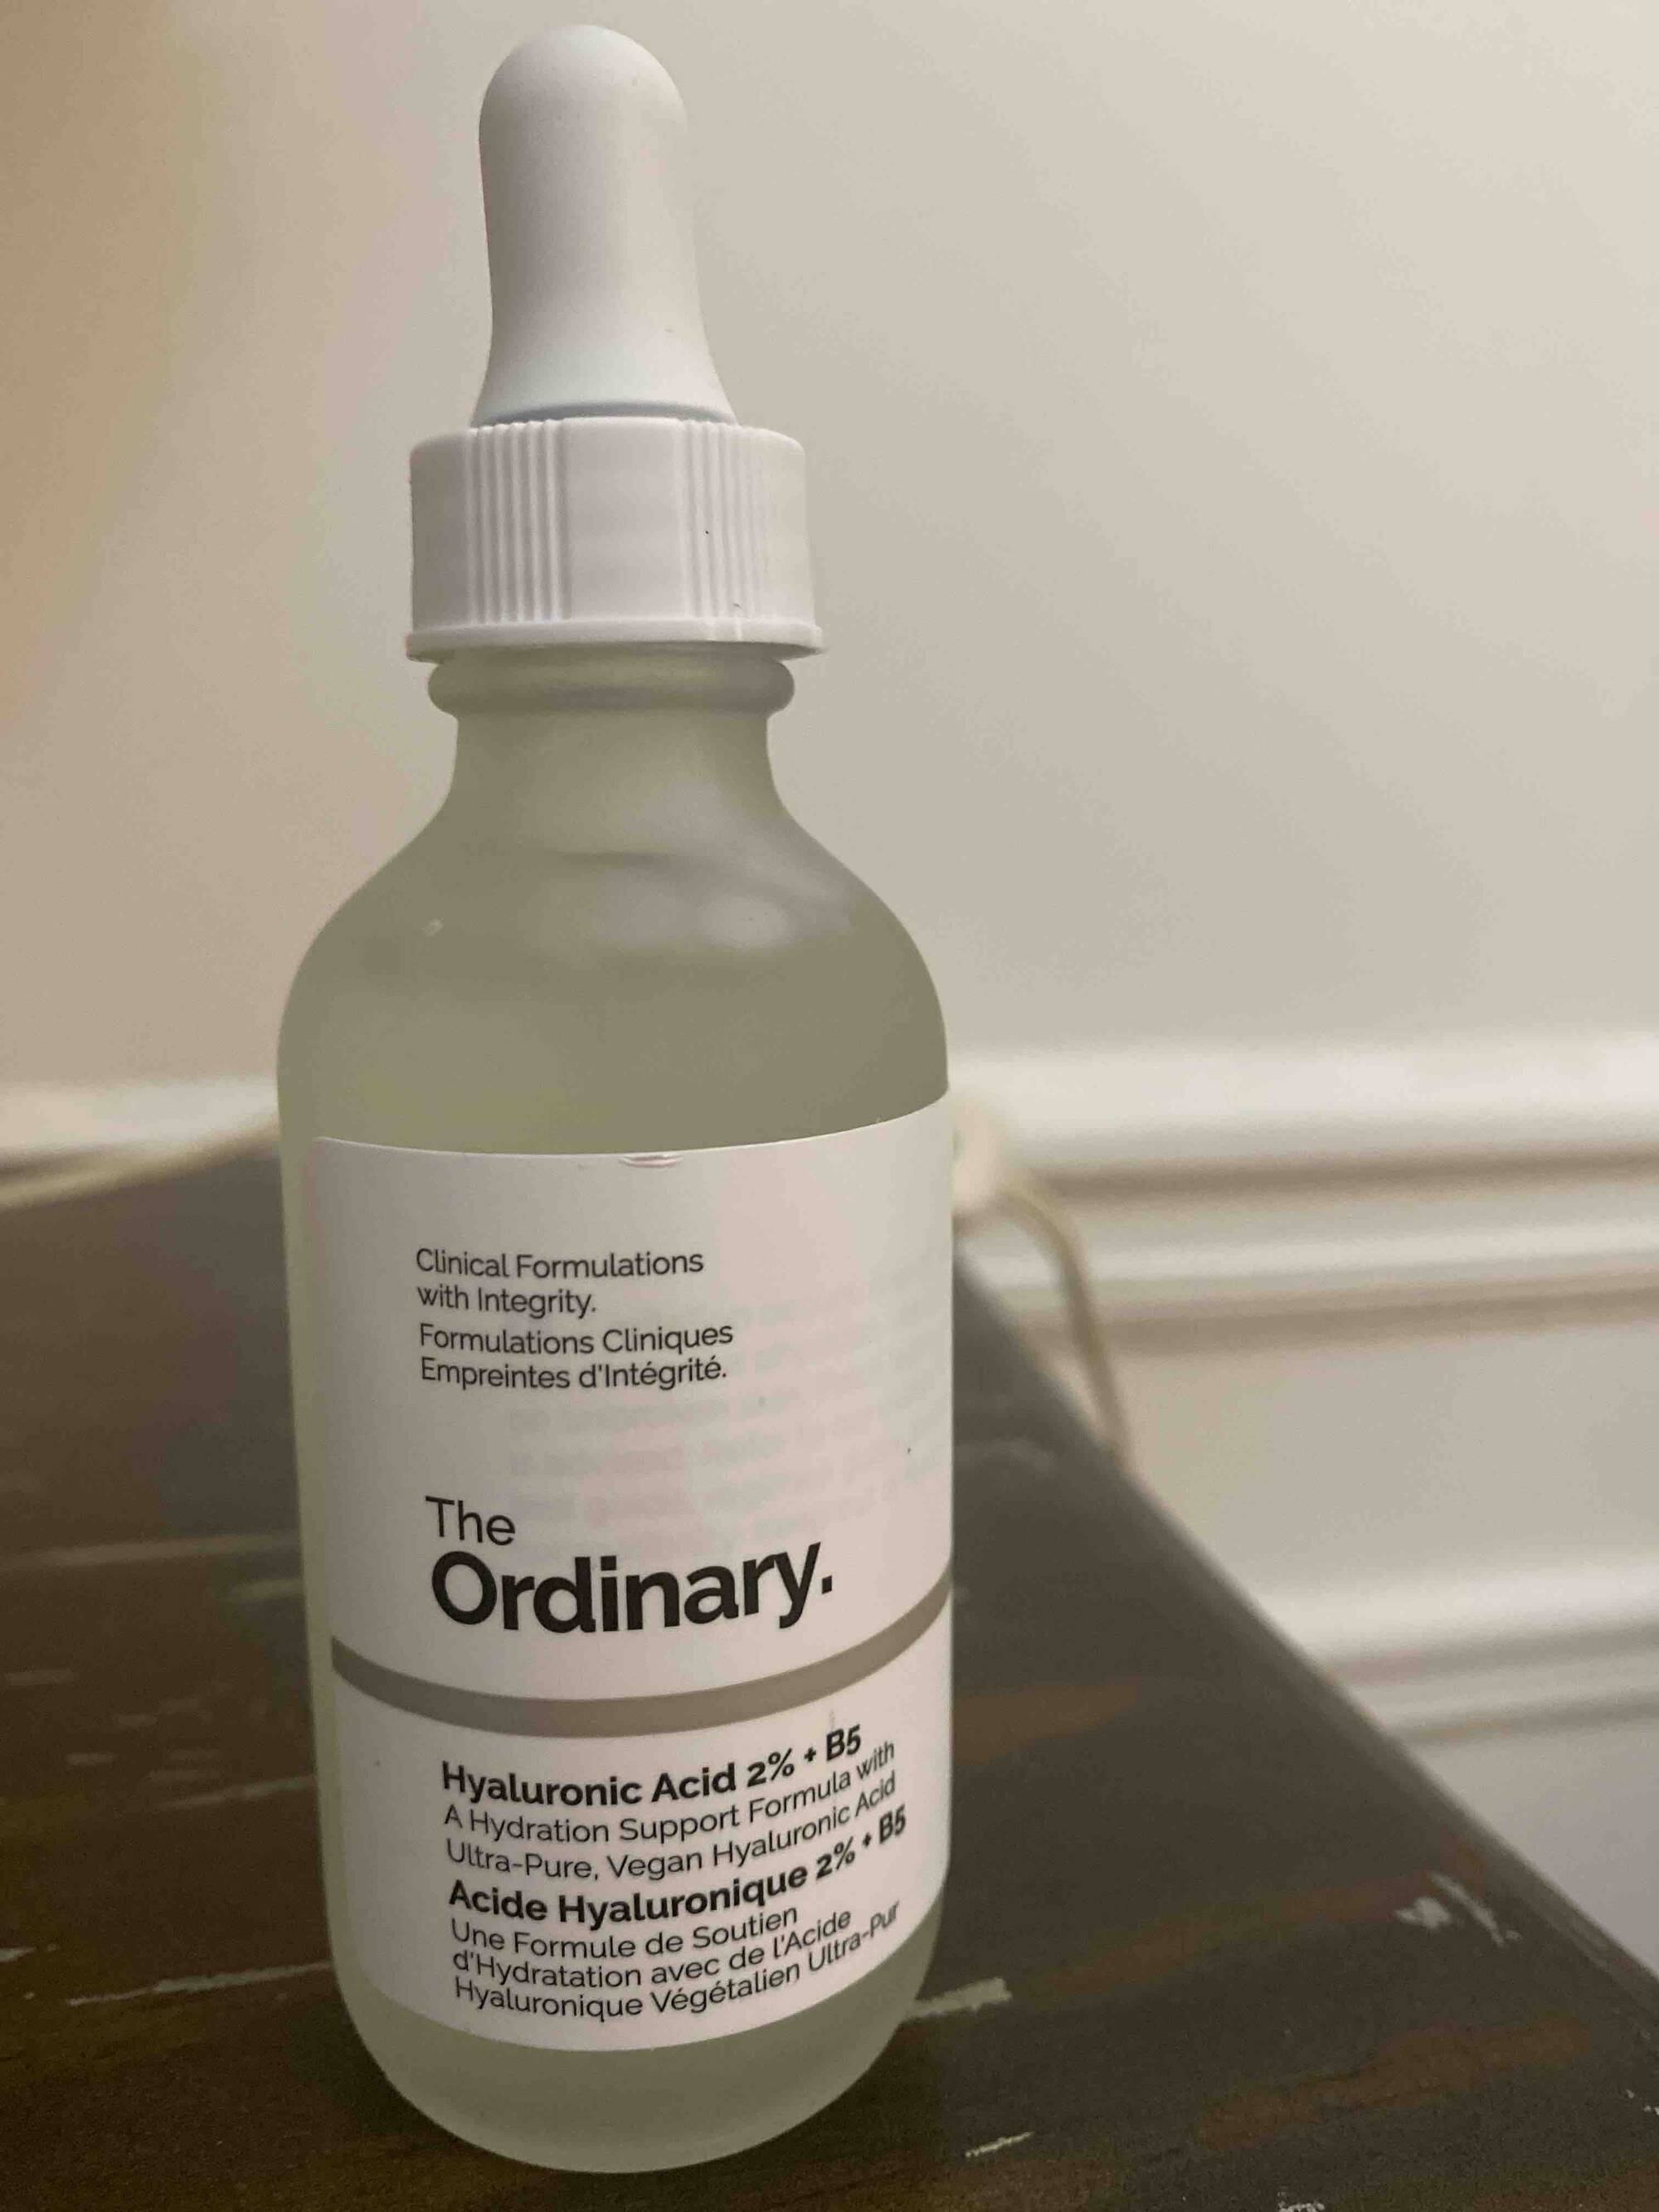 THE ORDINARY - Acide hyaluronique 2% + B5